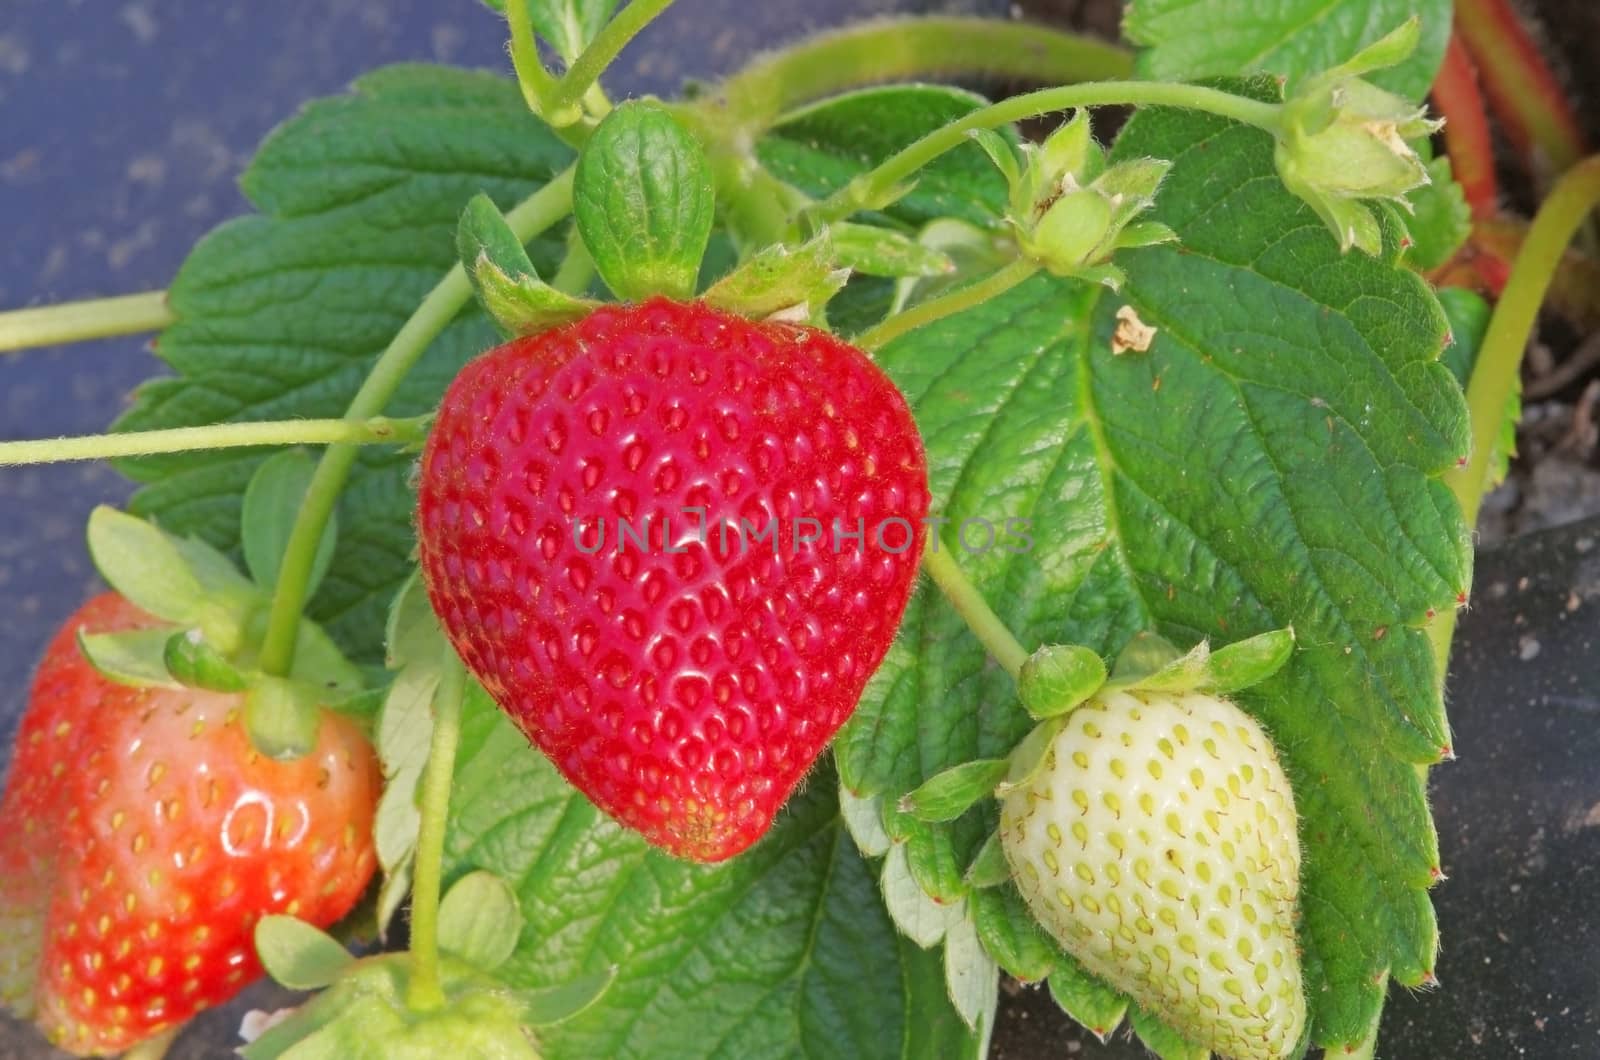 Strawberry plant with fruits in greenhouse